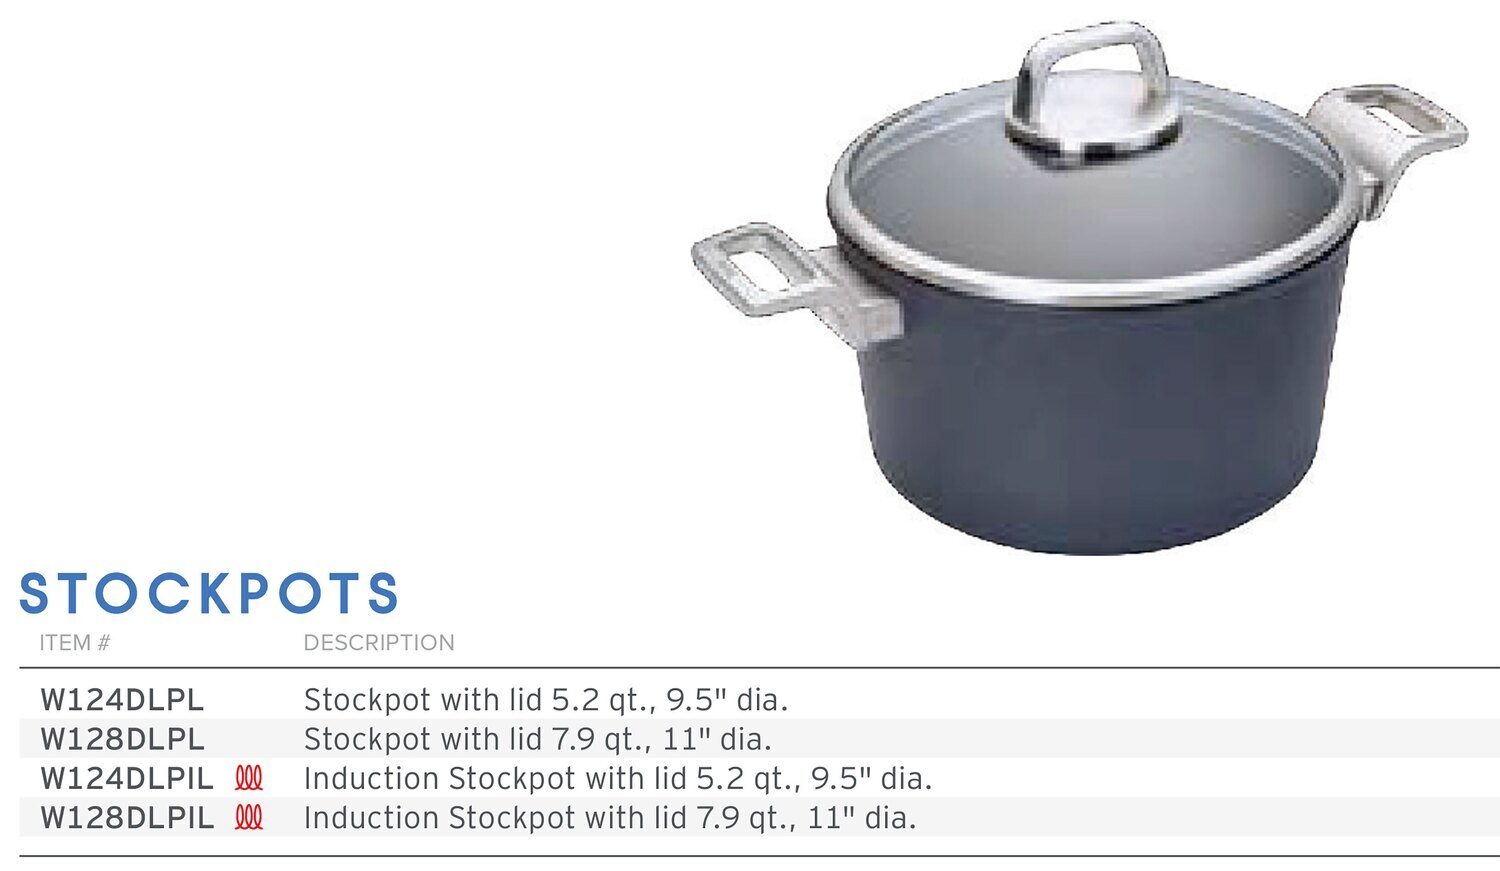 Frieling Diamond Lite Induction Stockpot with Lid 7.9 Qt. 11" W128DPIL